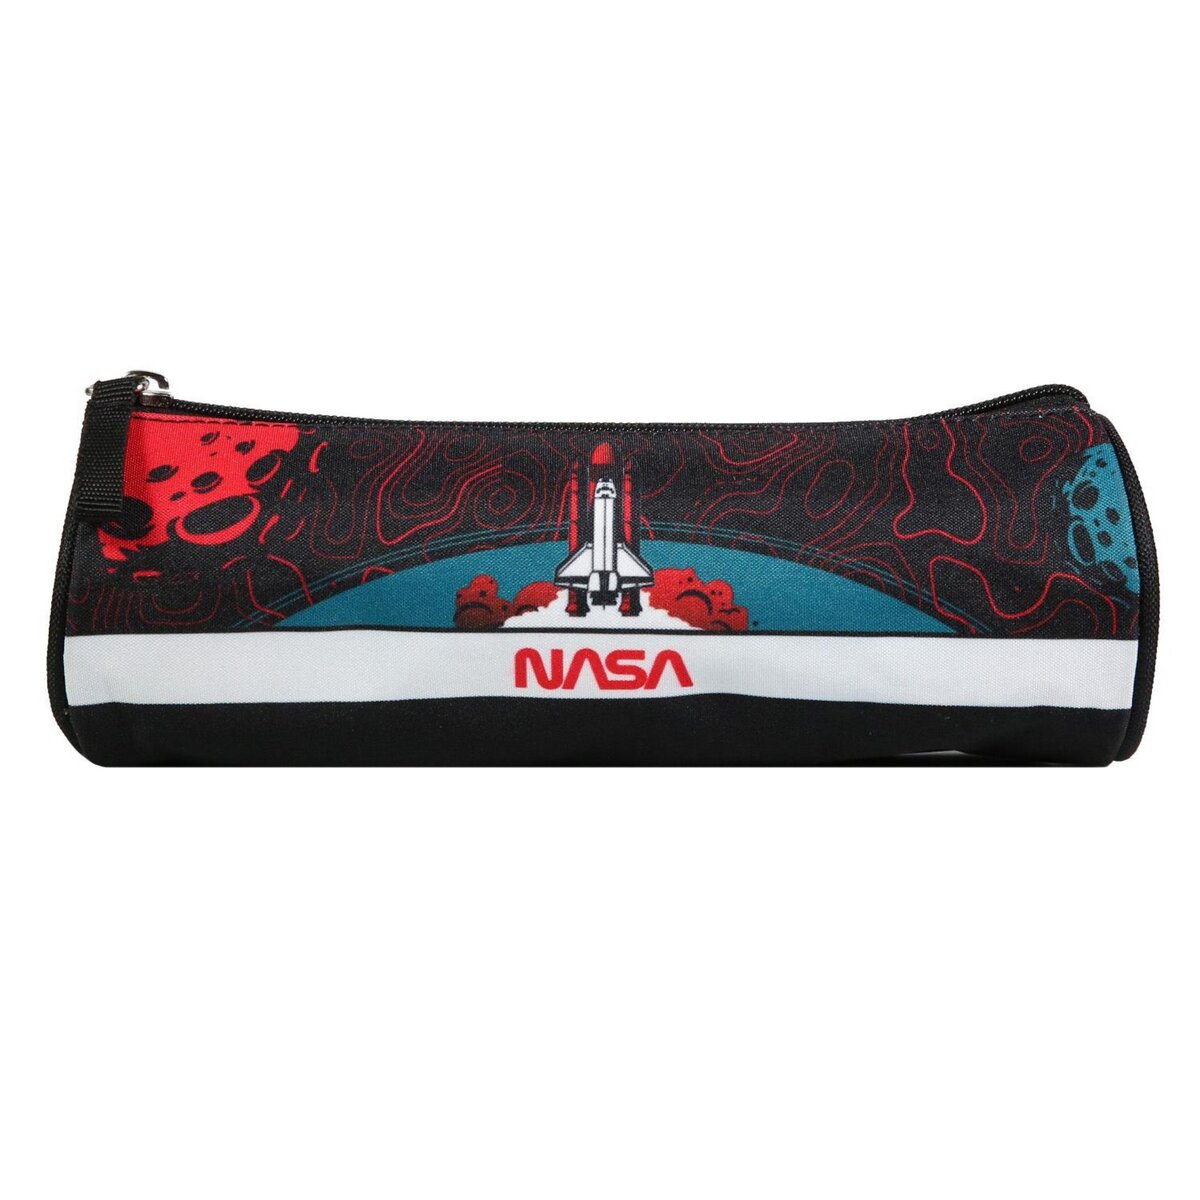 Bagtrotter BAGTROTTER Trousse scolaire ronde Nasa Rouge